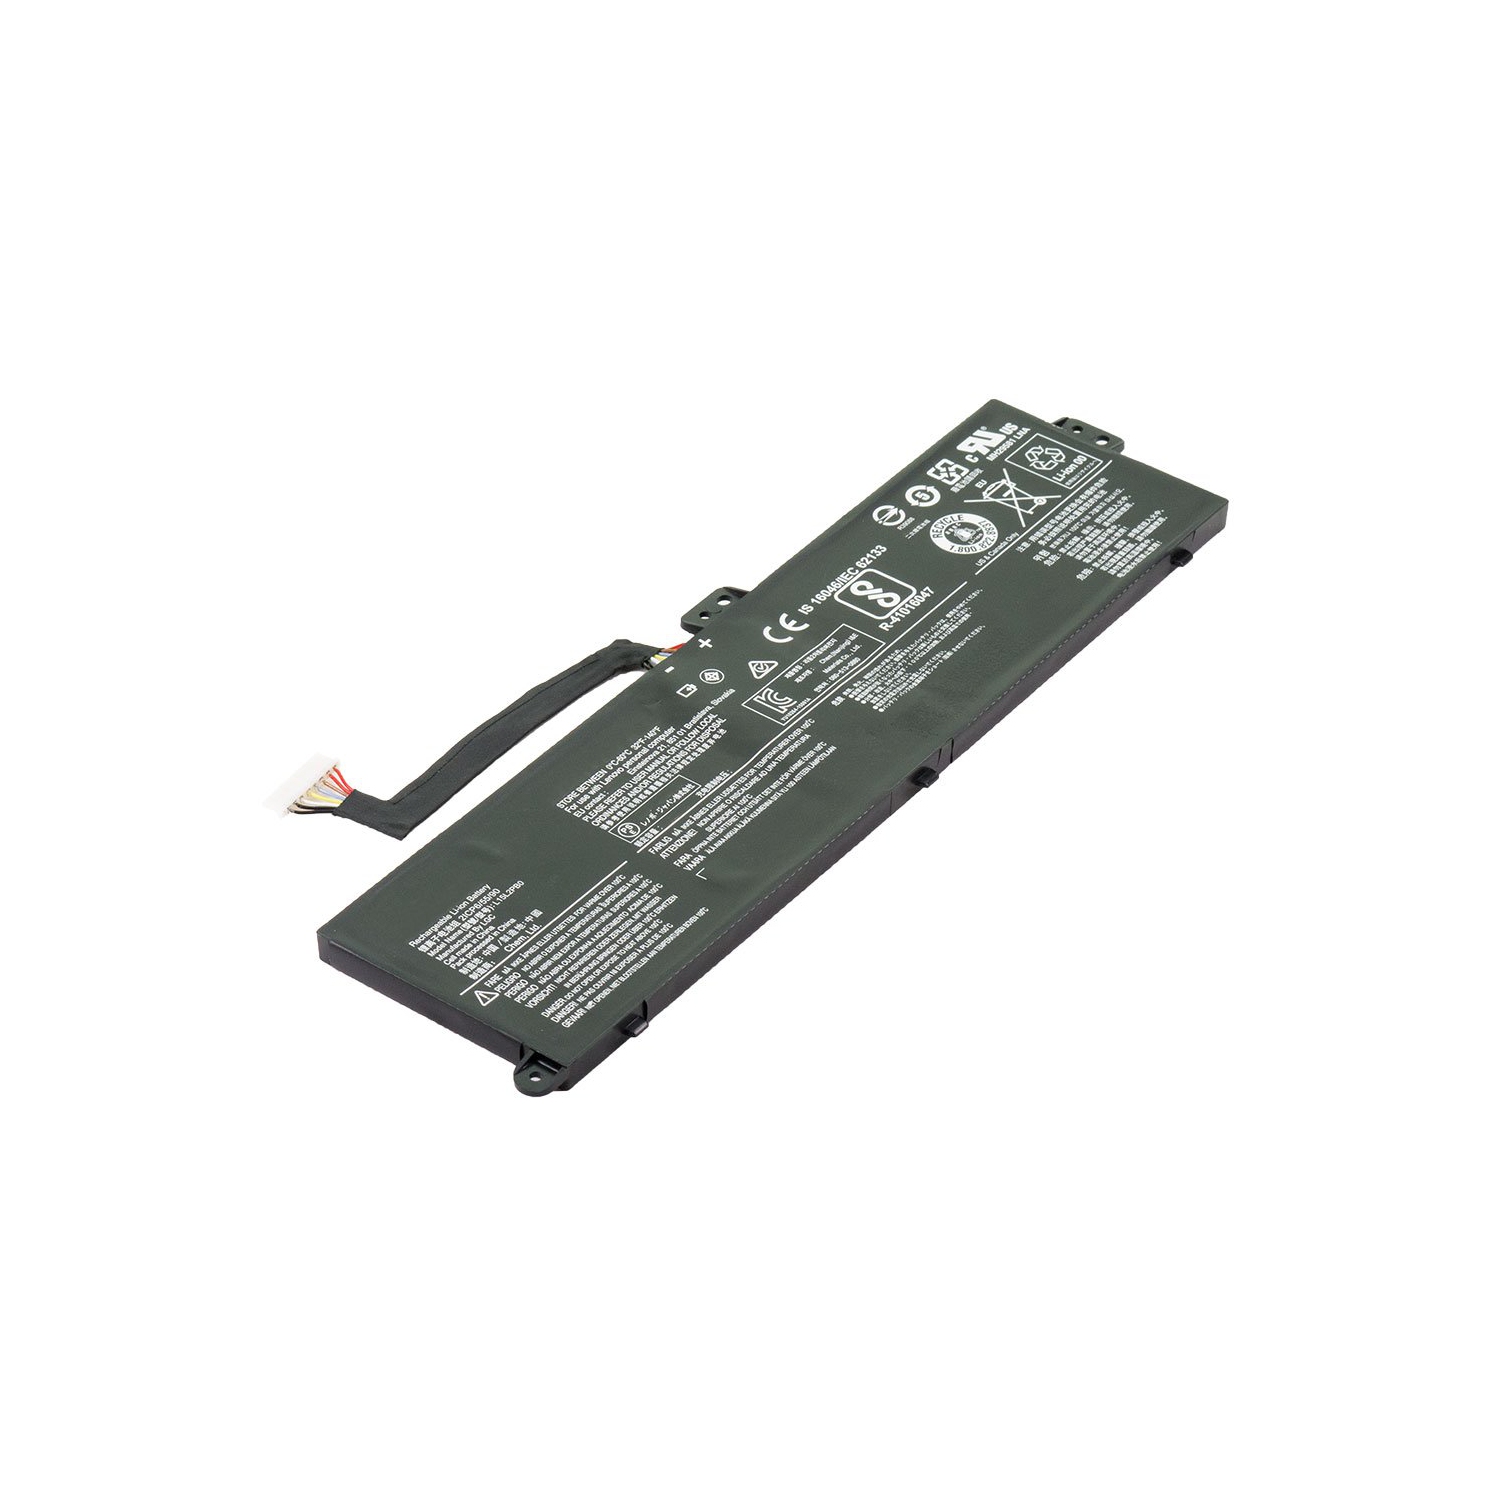 Laptop Battery Replacement for Lenovo 100S Chromebook-11IBY 80QN0008CF, 5B10J46559, 5B10J46560, 5B10J46561, L15L2PB0, L15M2PB0